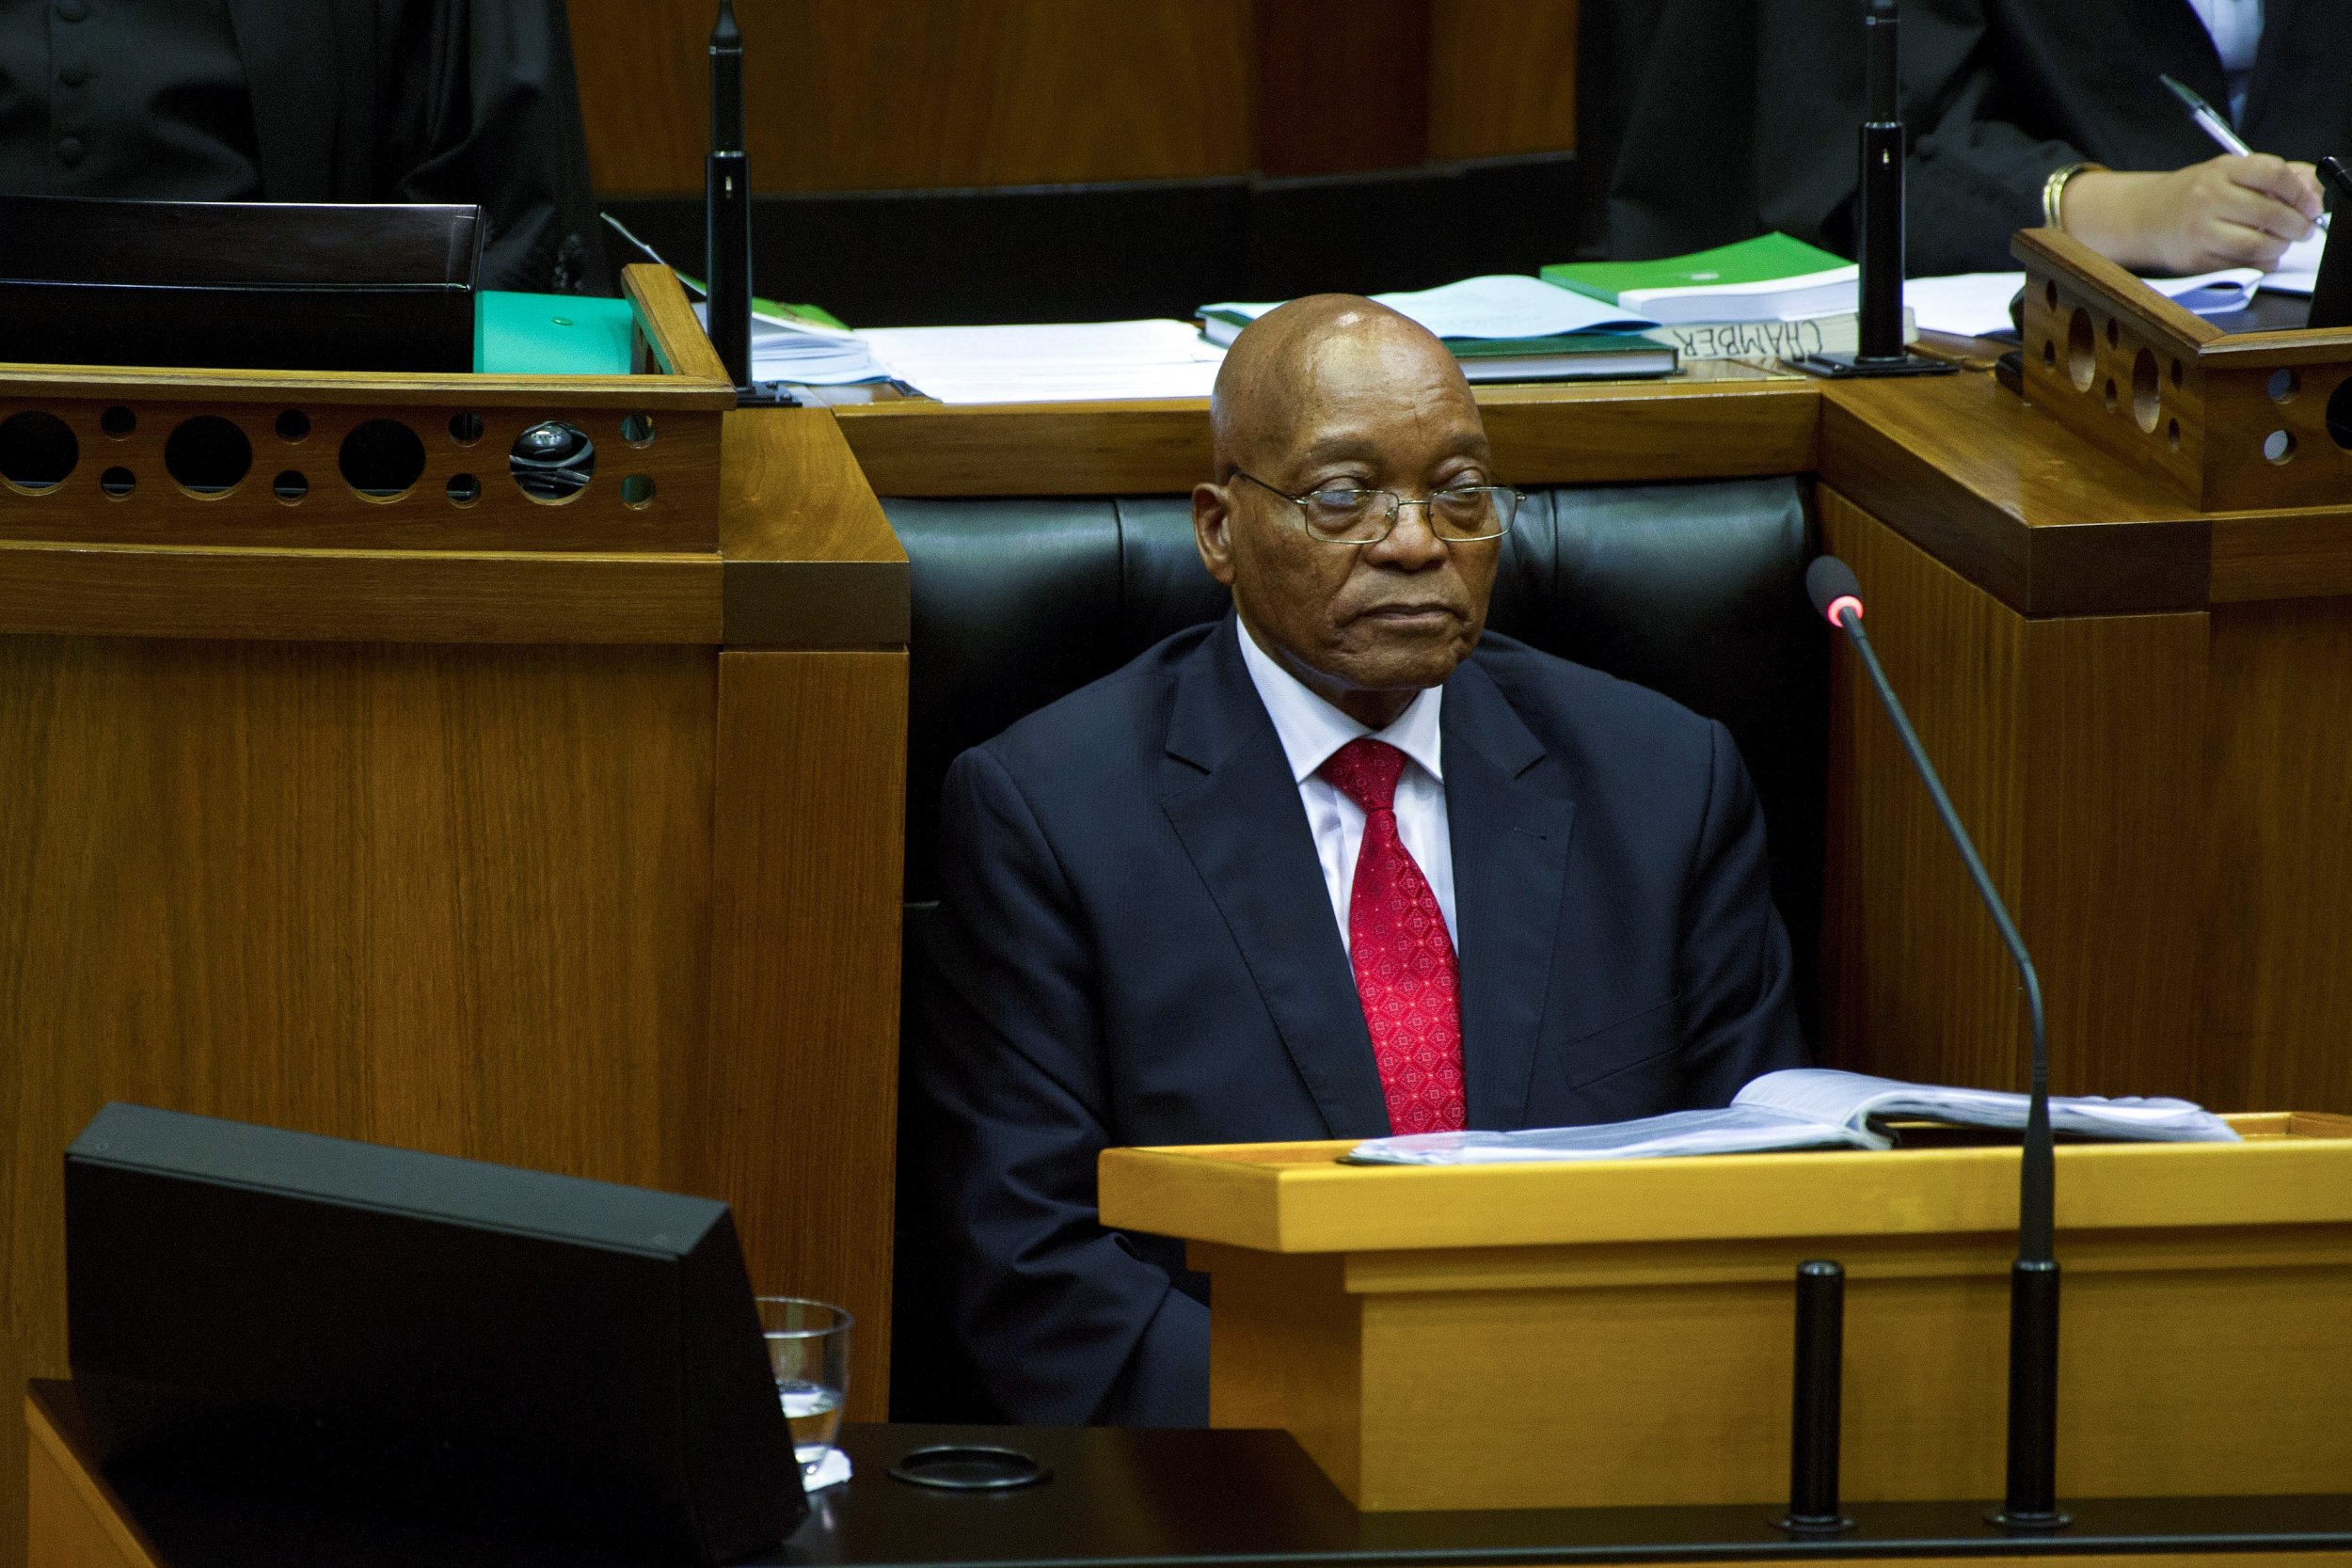 South African President Jacob Zuma may be on borrowed time 